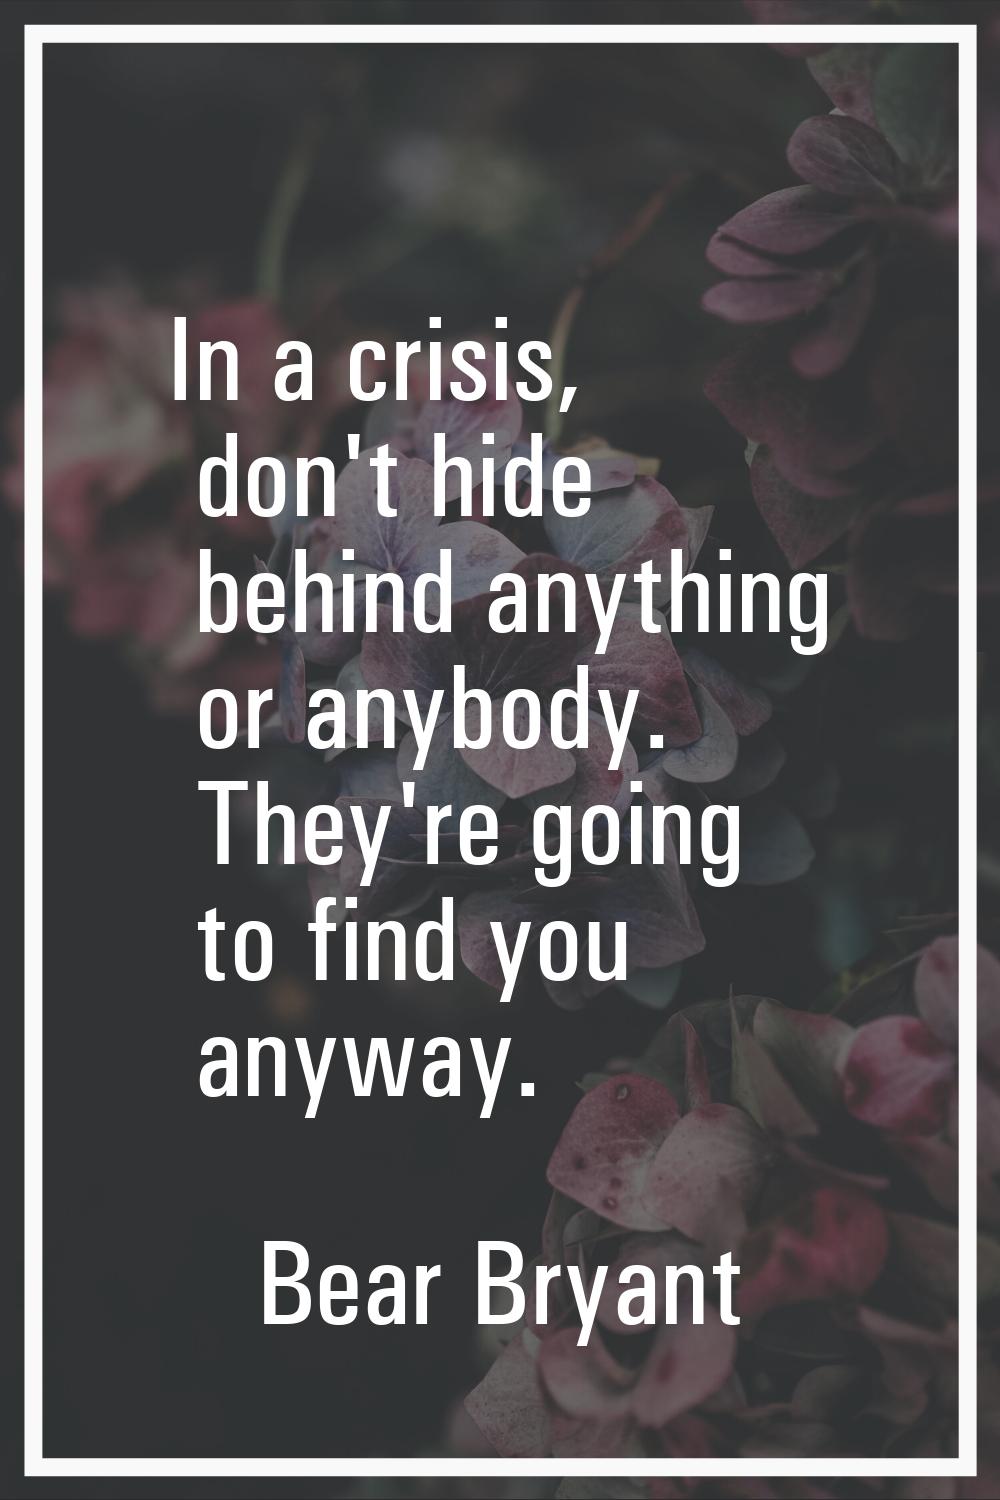 In a crisis, don't hide behind anything or anybody. They're going to find you anyway.